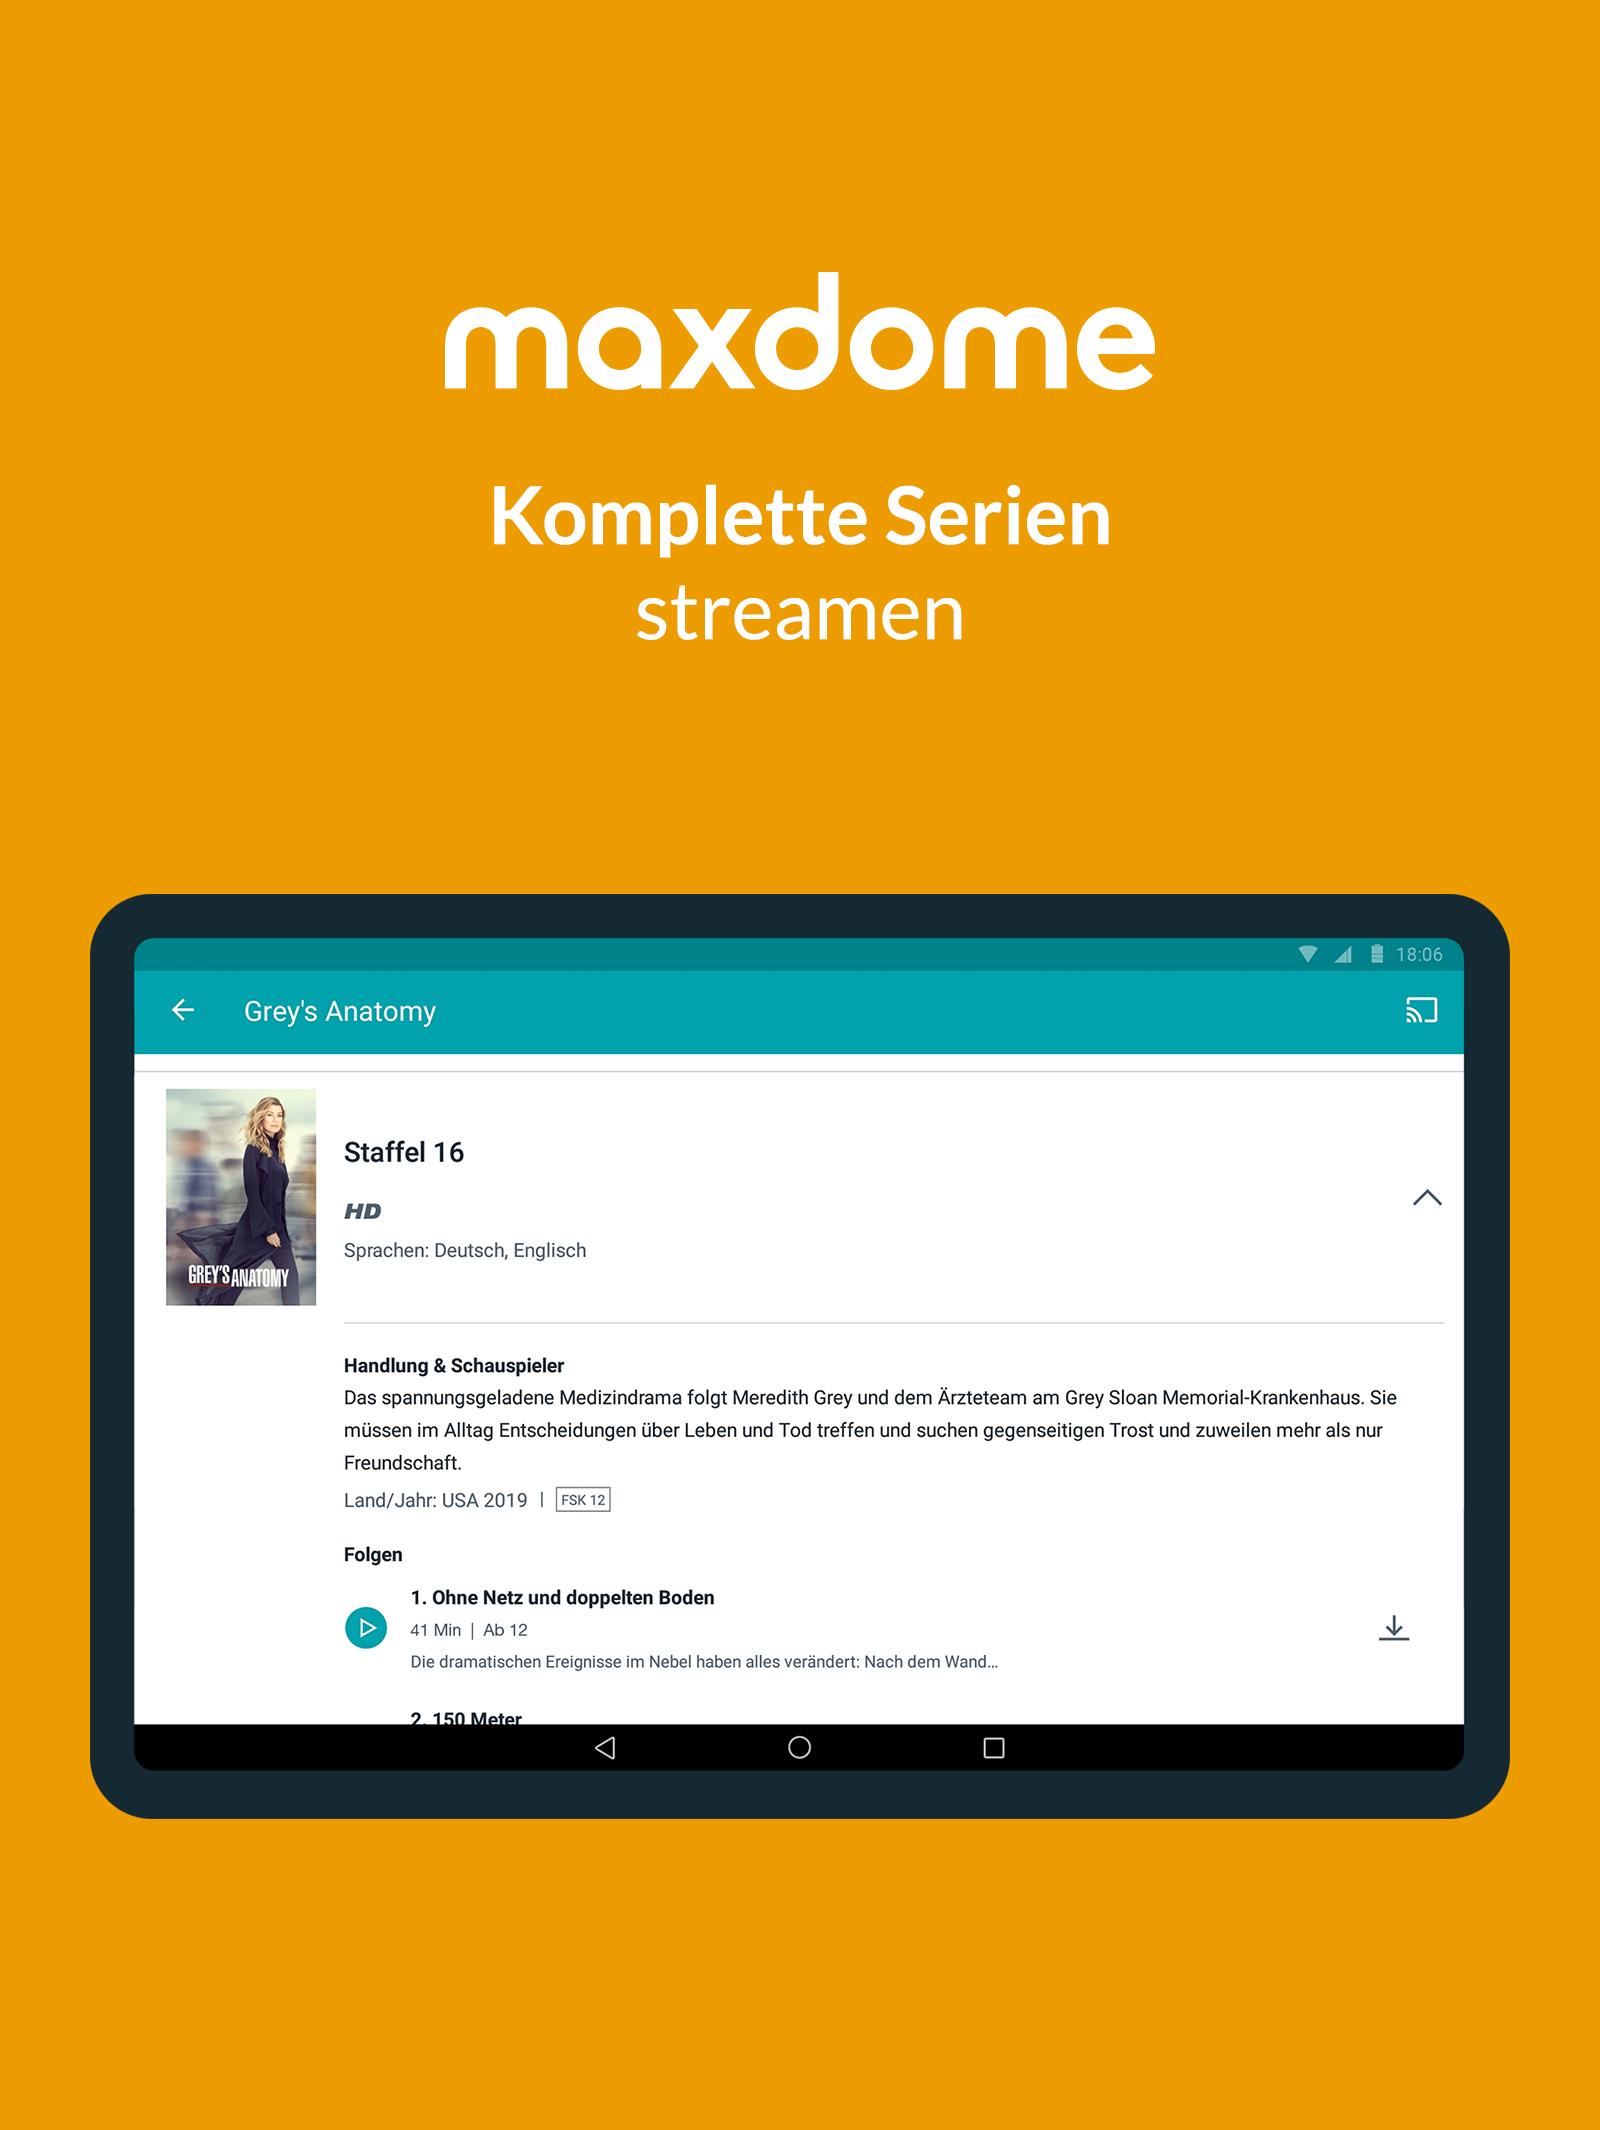 maxdome for Android - APK Download